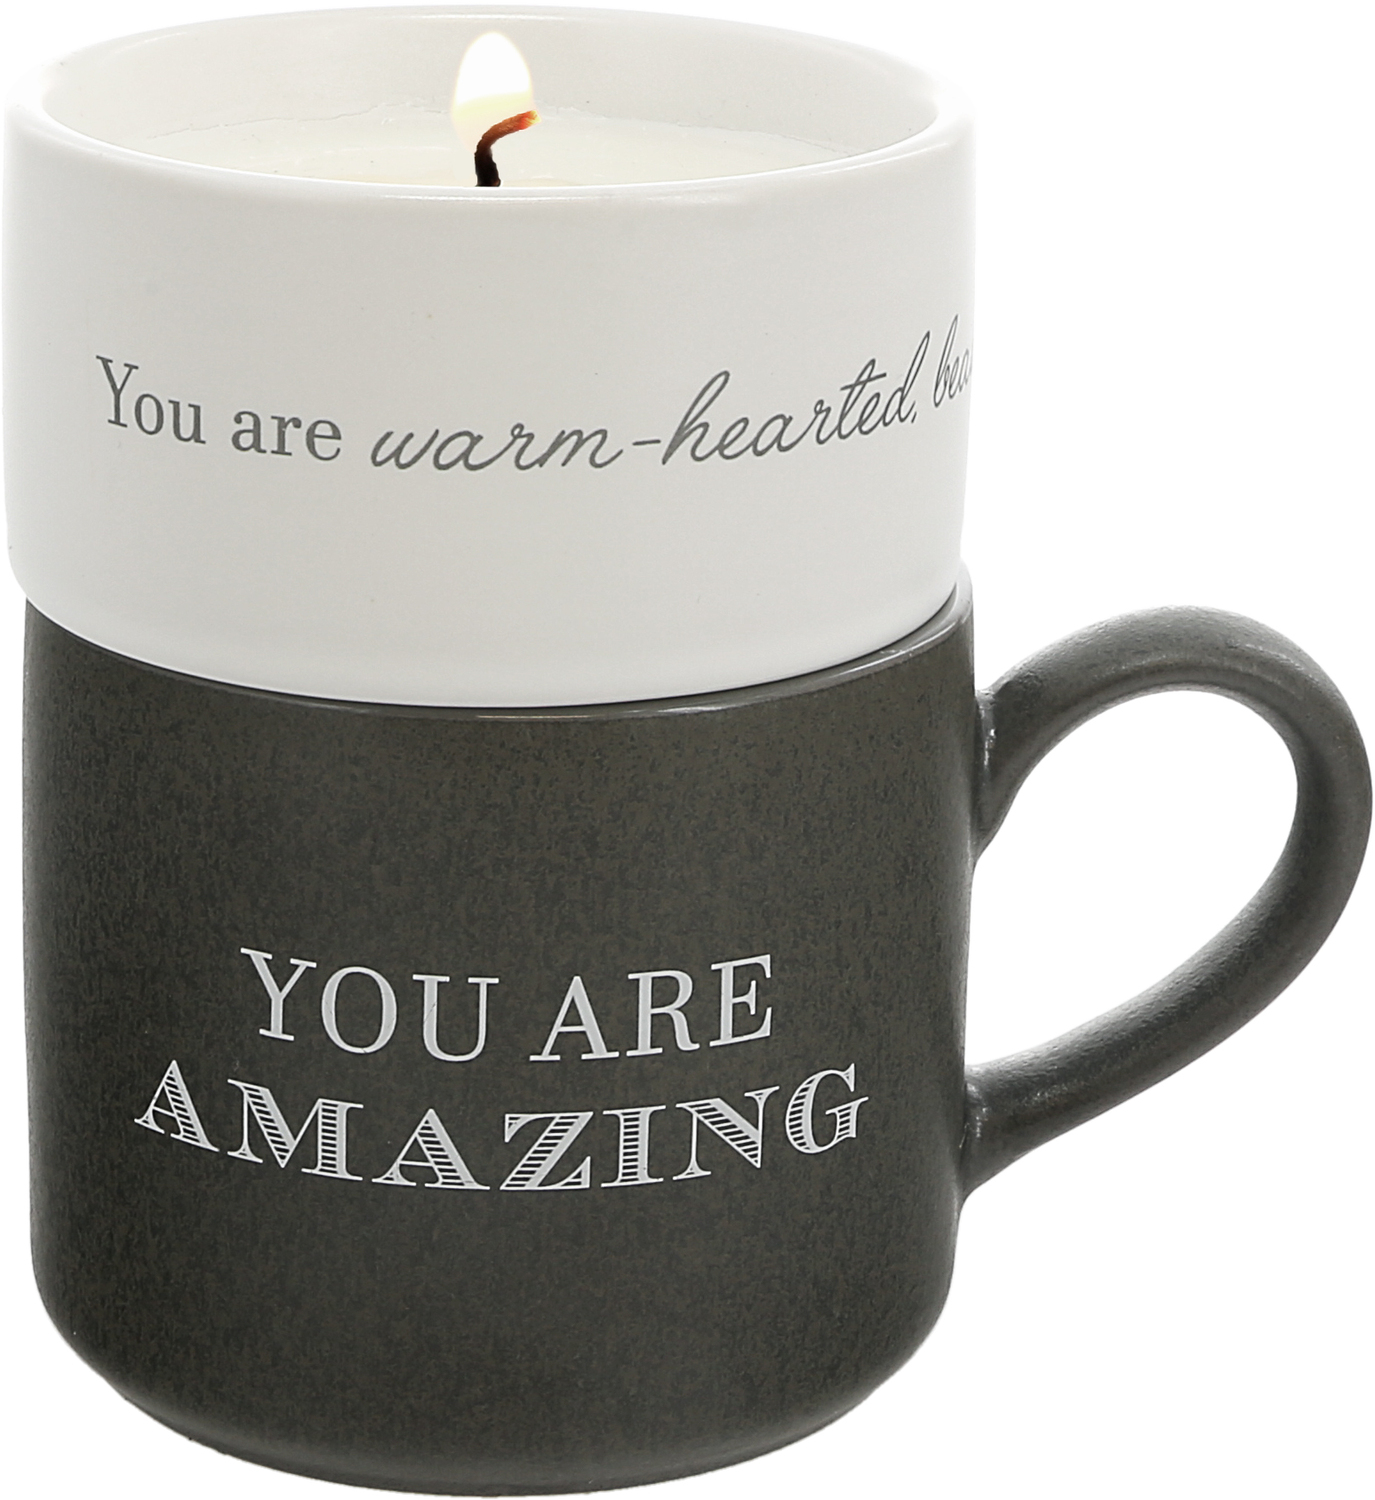 Amazing by Filled with Warmth - Amazing - Stacking Mug and Candle Set
100% Soy Wax Scent: Tranquility